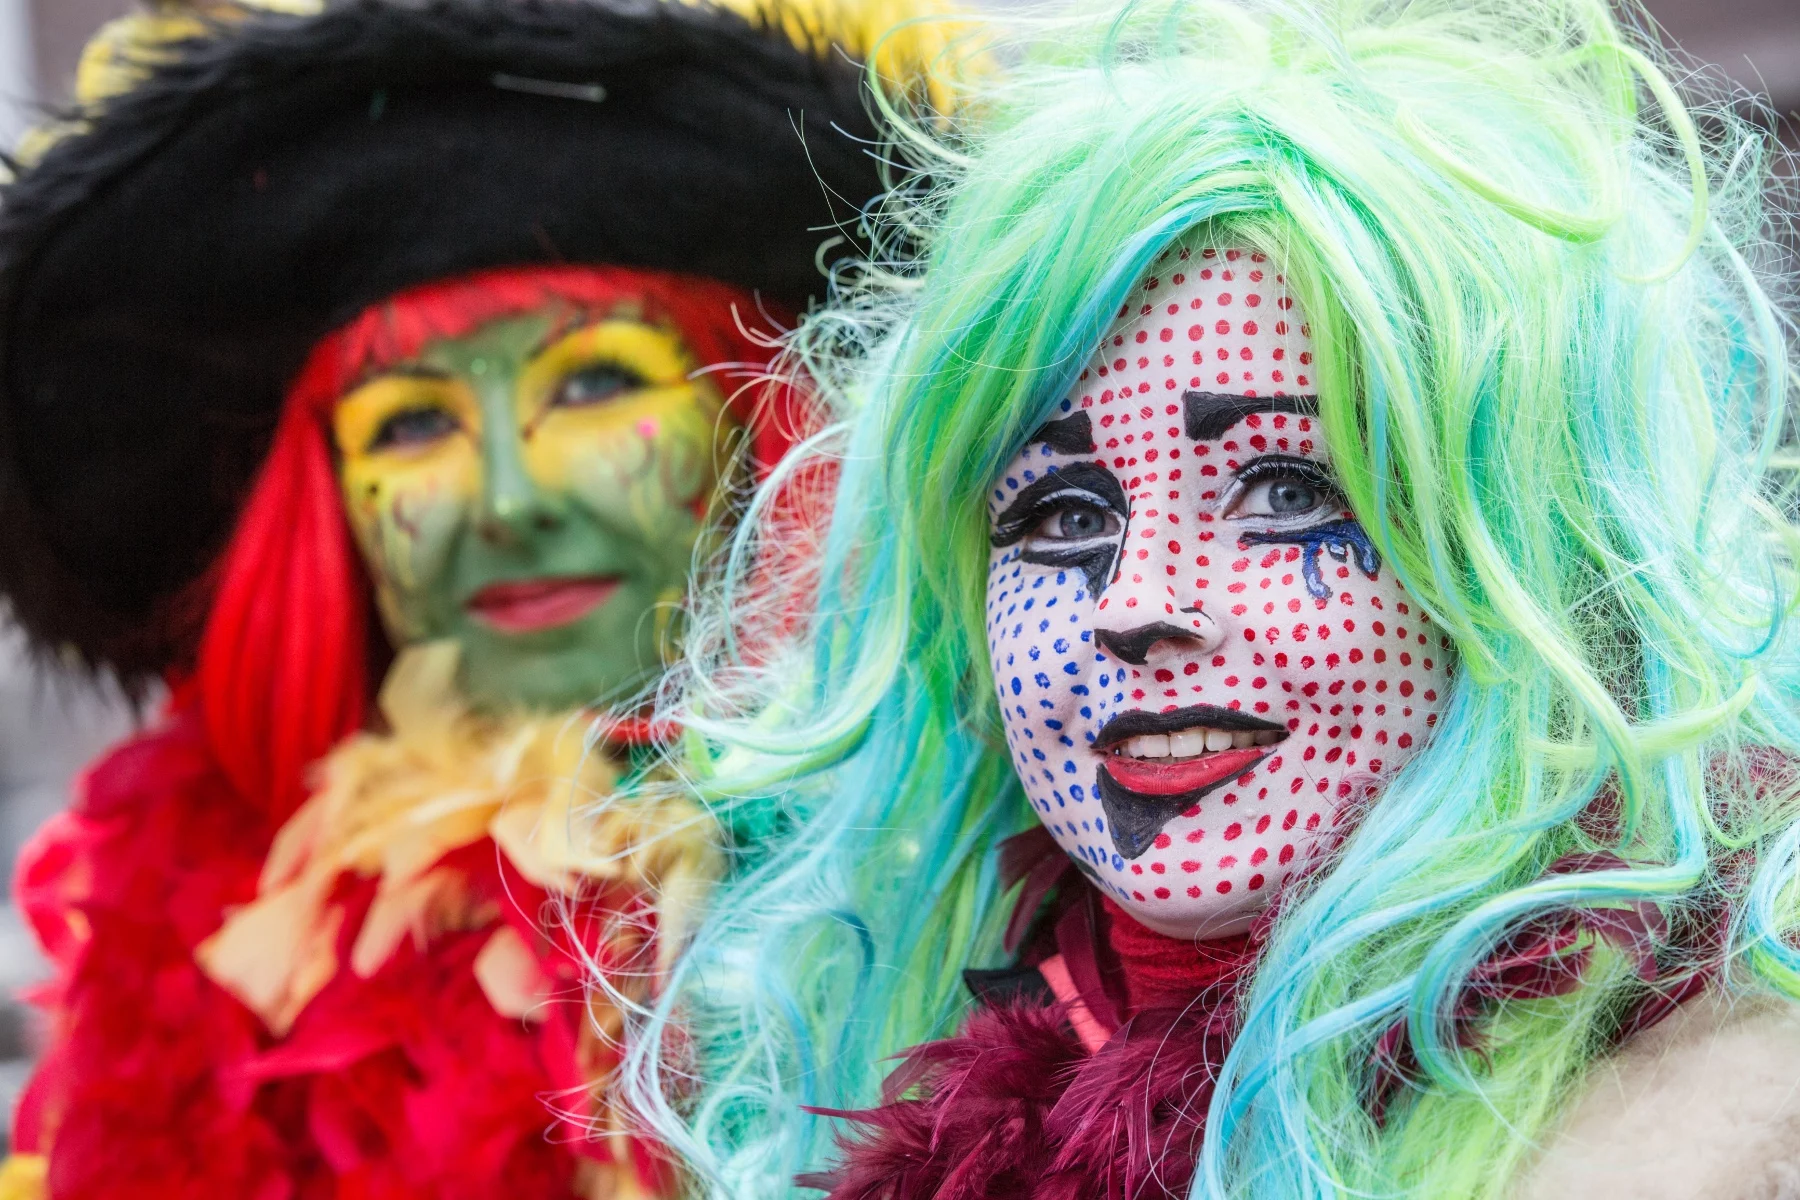 Two women in colorful face paint and wigs